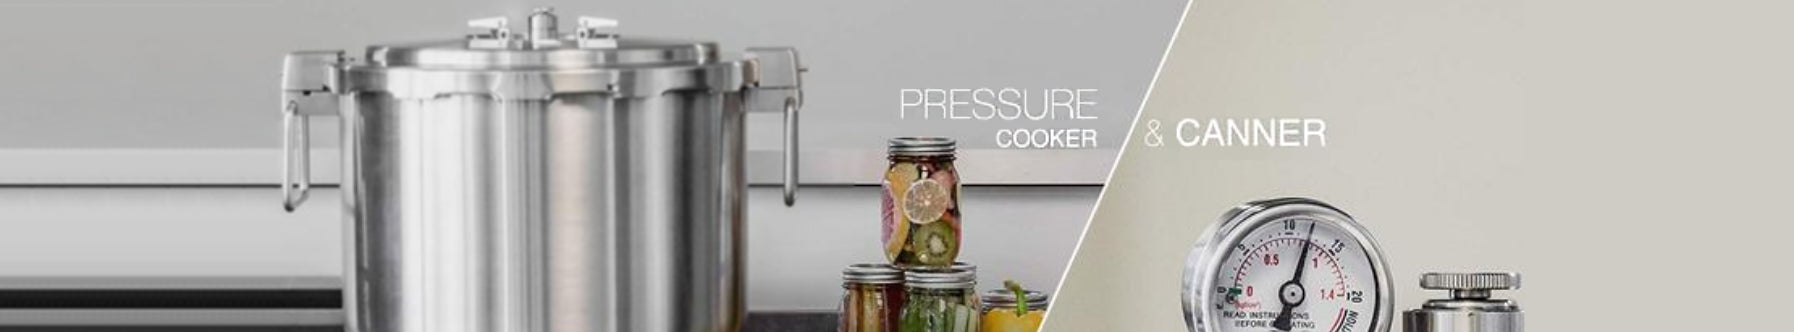 Commercial Pressure Cooker & Canner